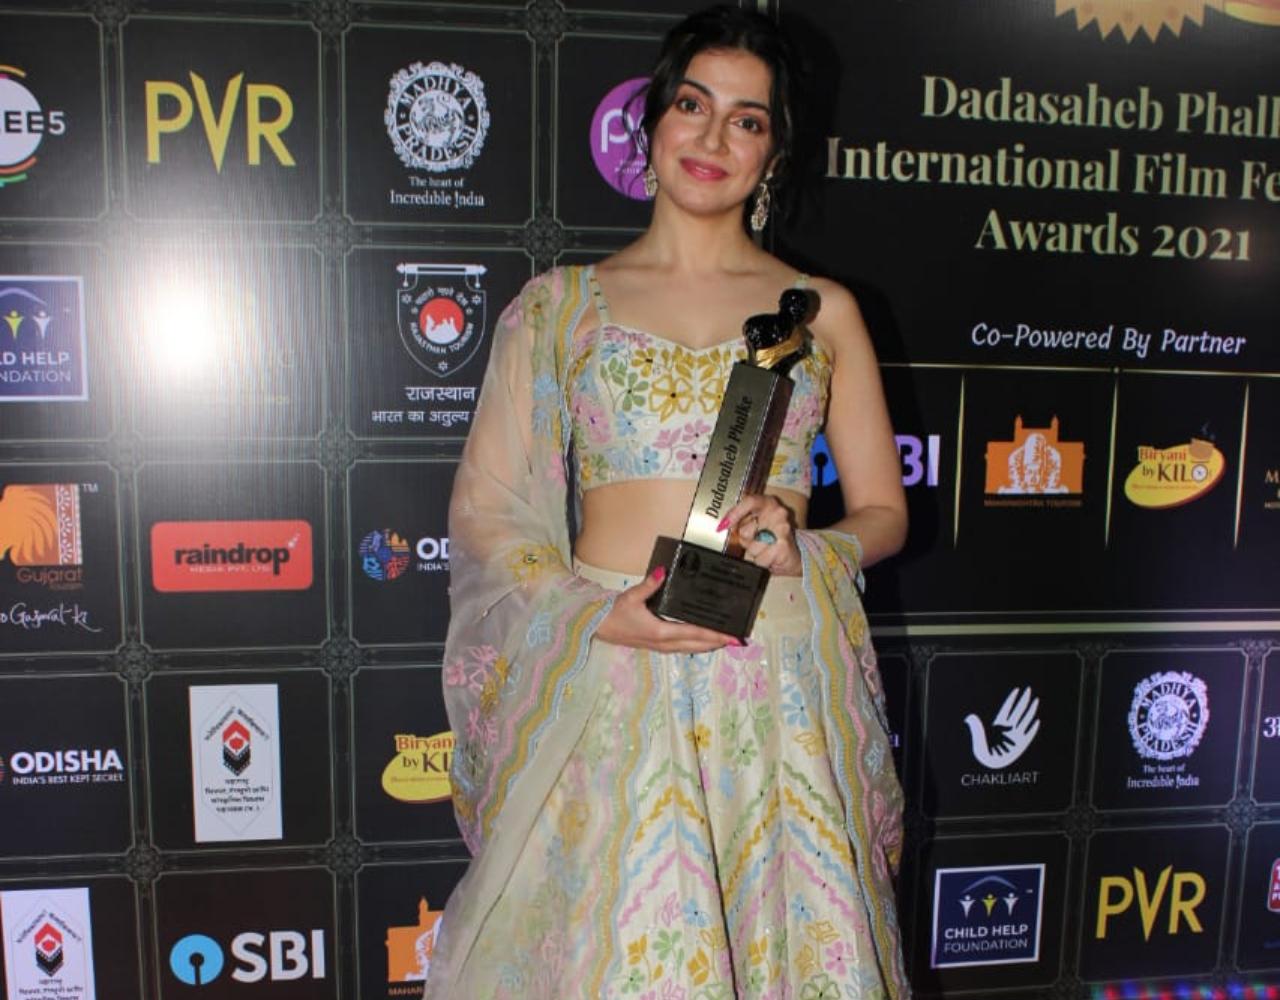 Several Bollywood celebrities made a smashing entry at the red carpet event of the famed Dadasaheb Phalke Award 2021 held at a plush hotel in Mumbai. (All pictures: Yogen Shah)